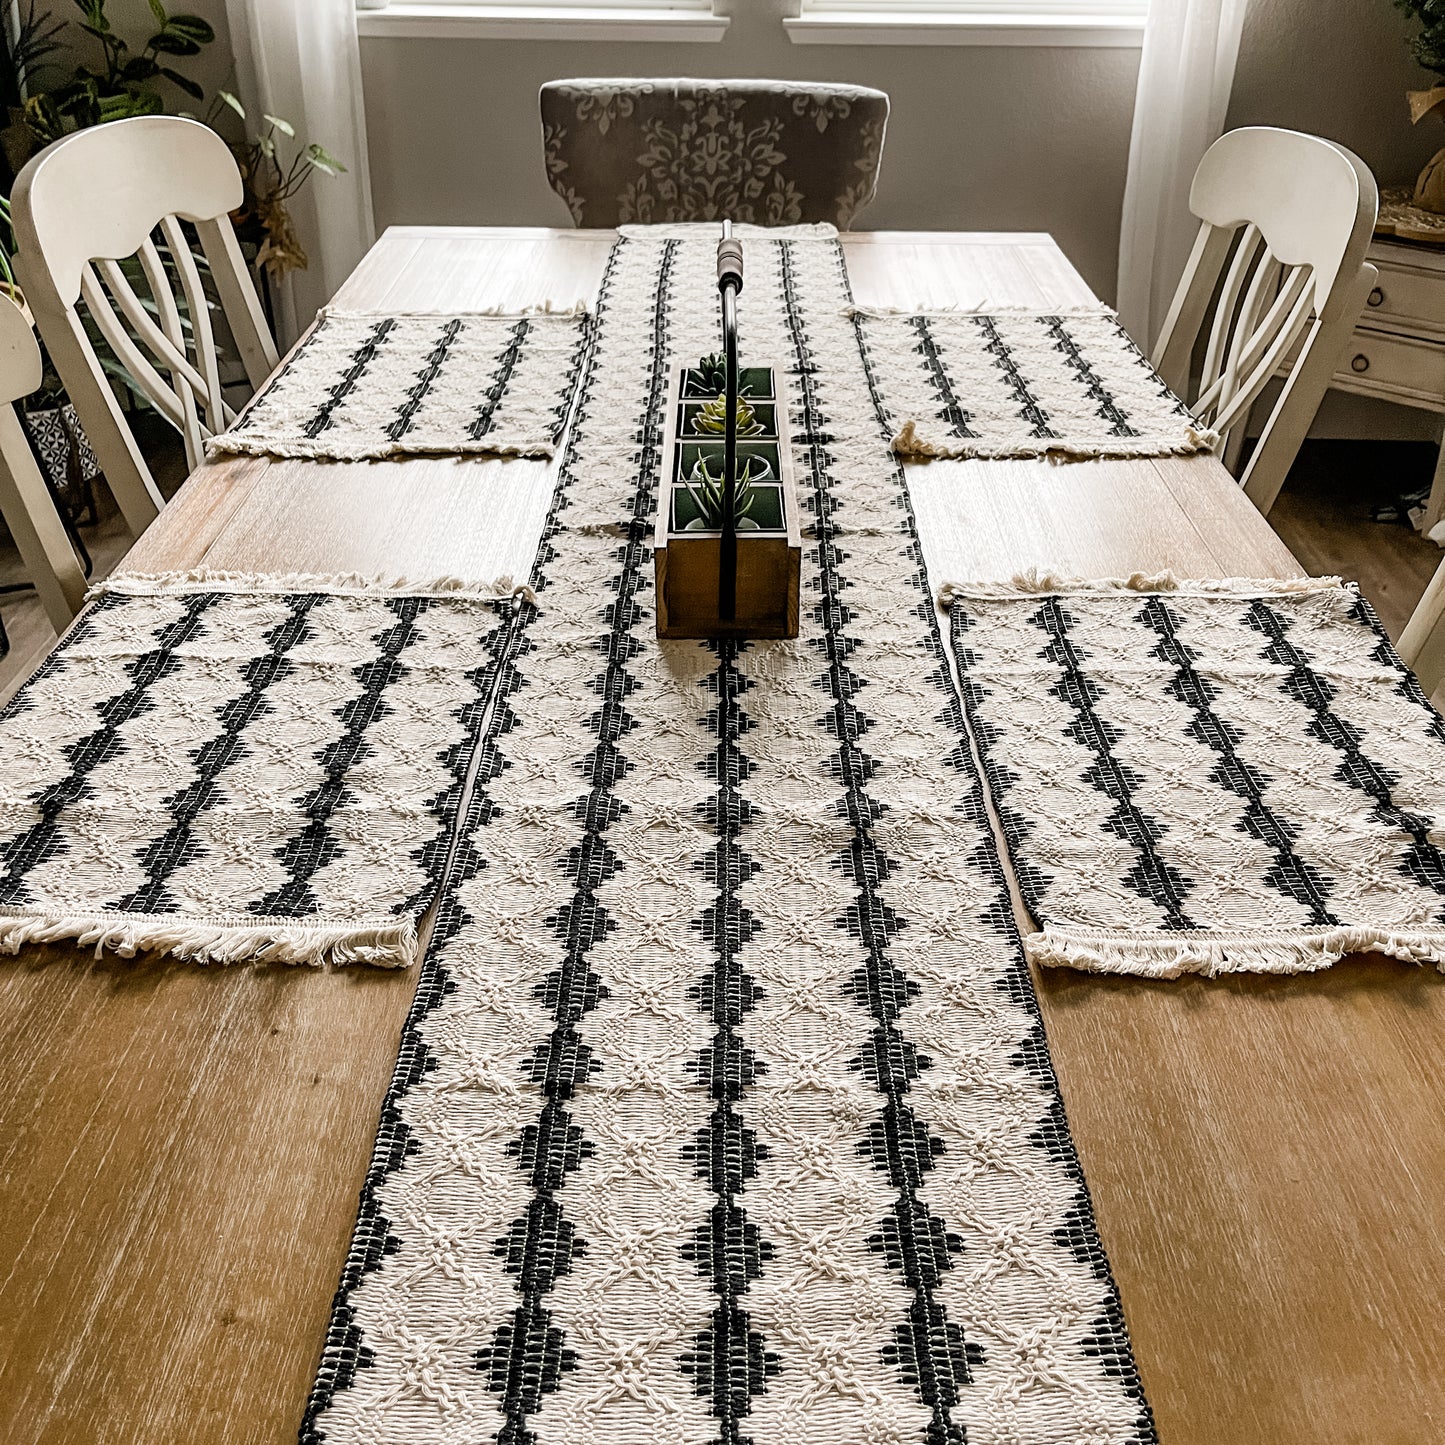 Classic Modern Printed Placemats Set of 4